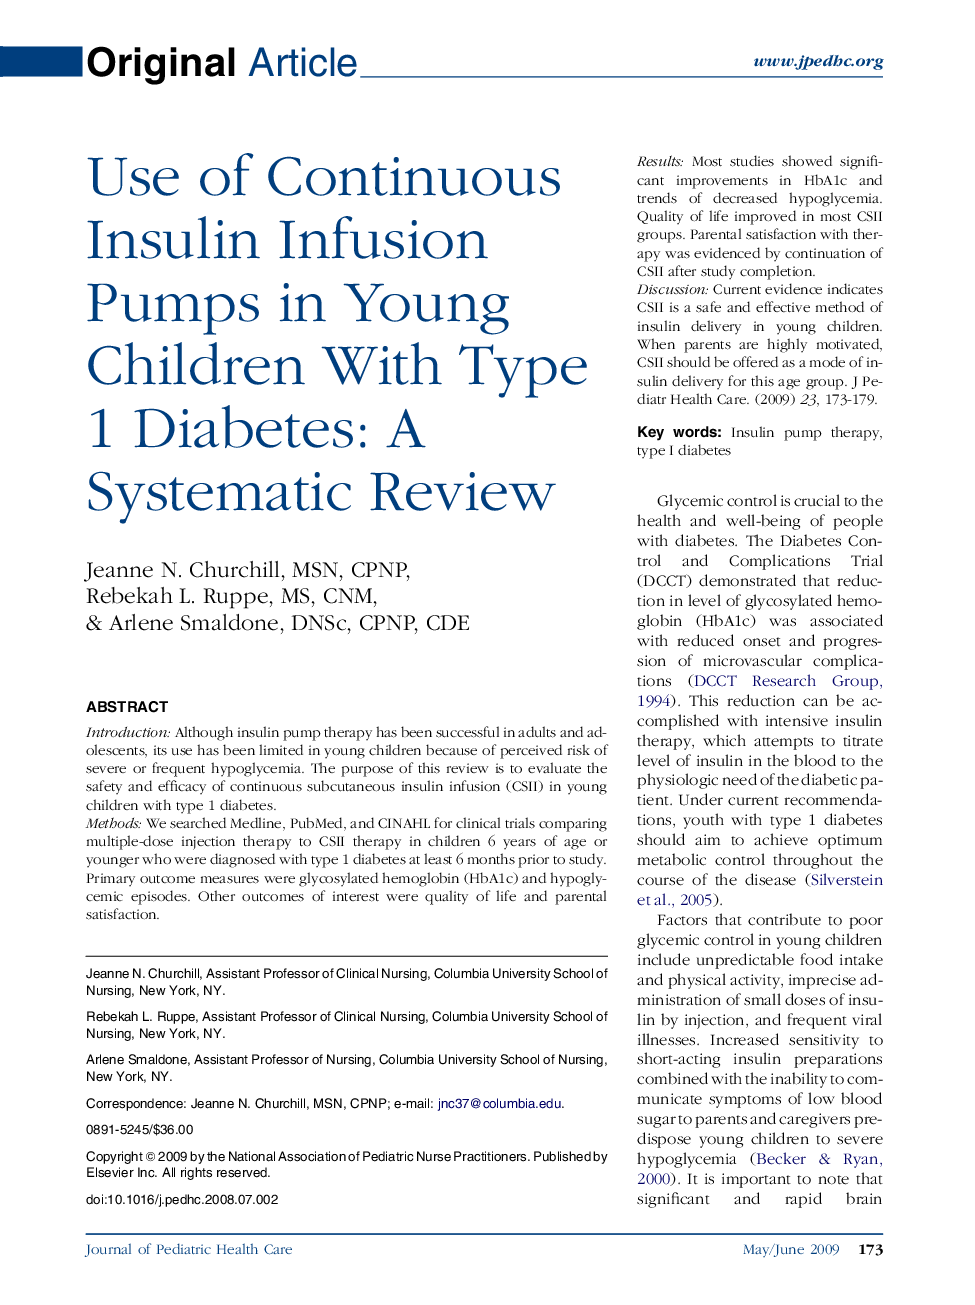 Use of Continuous Insulin Infusion Pumps in Young Children With Type 1 Diabetes: A Systematic Review